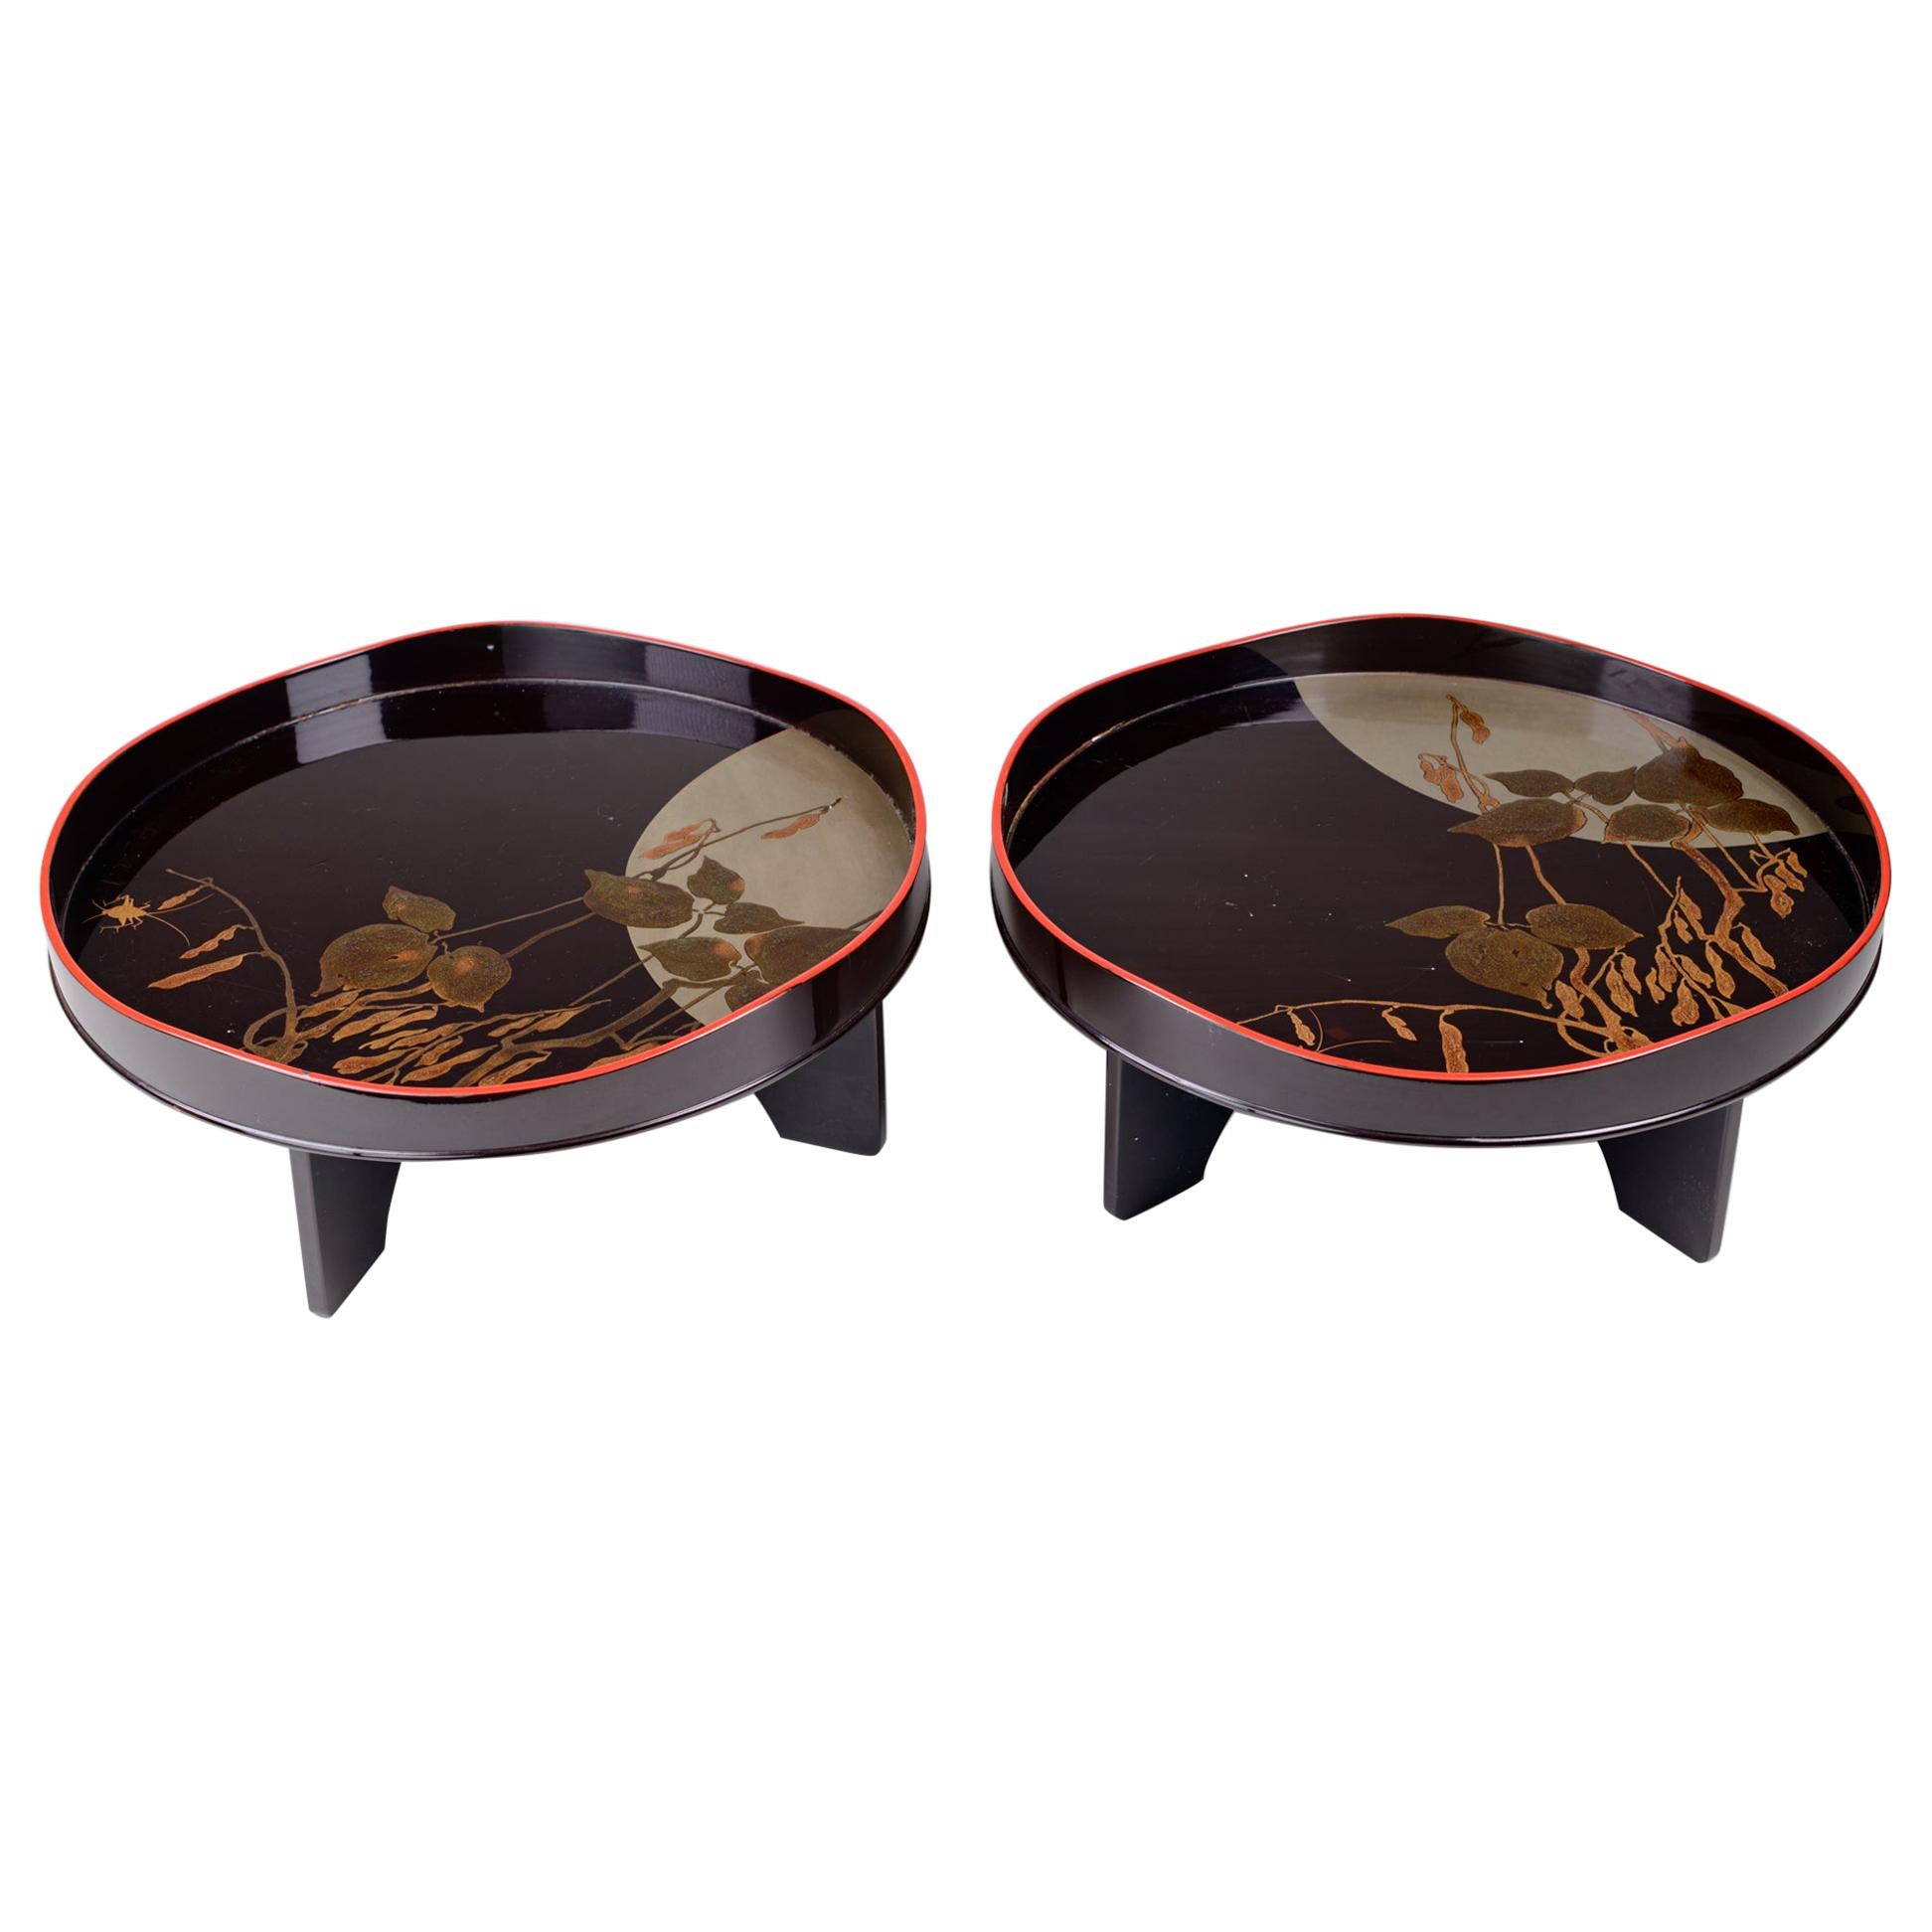 Pair of Antique Japanese Lacquer Trays